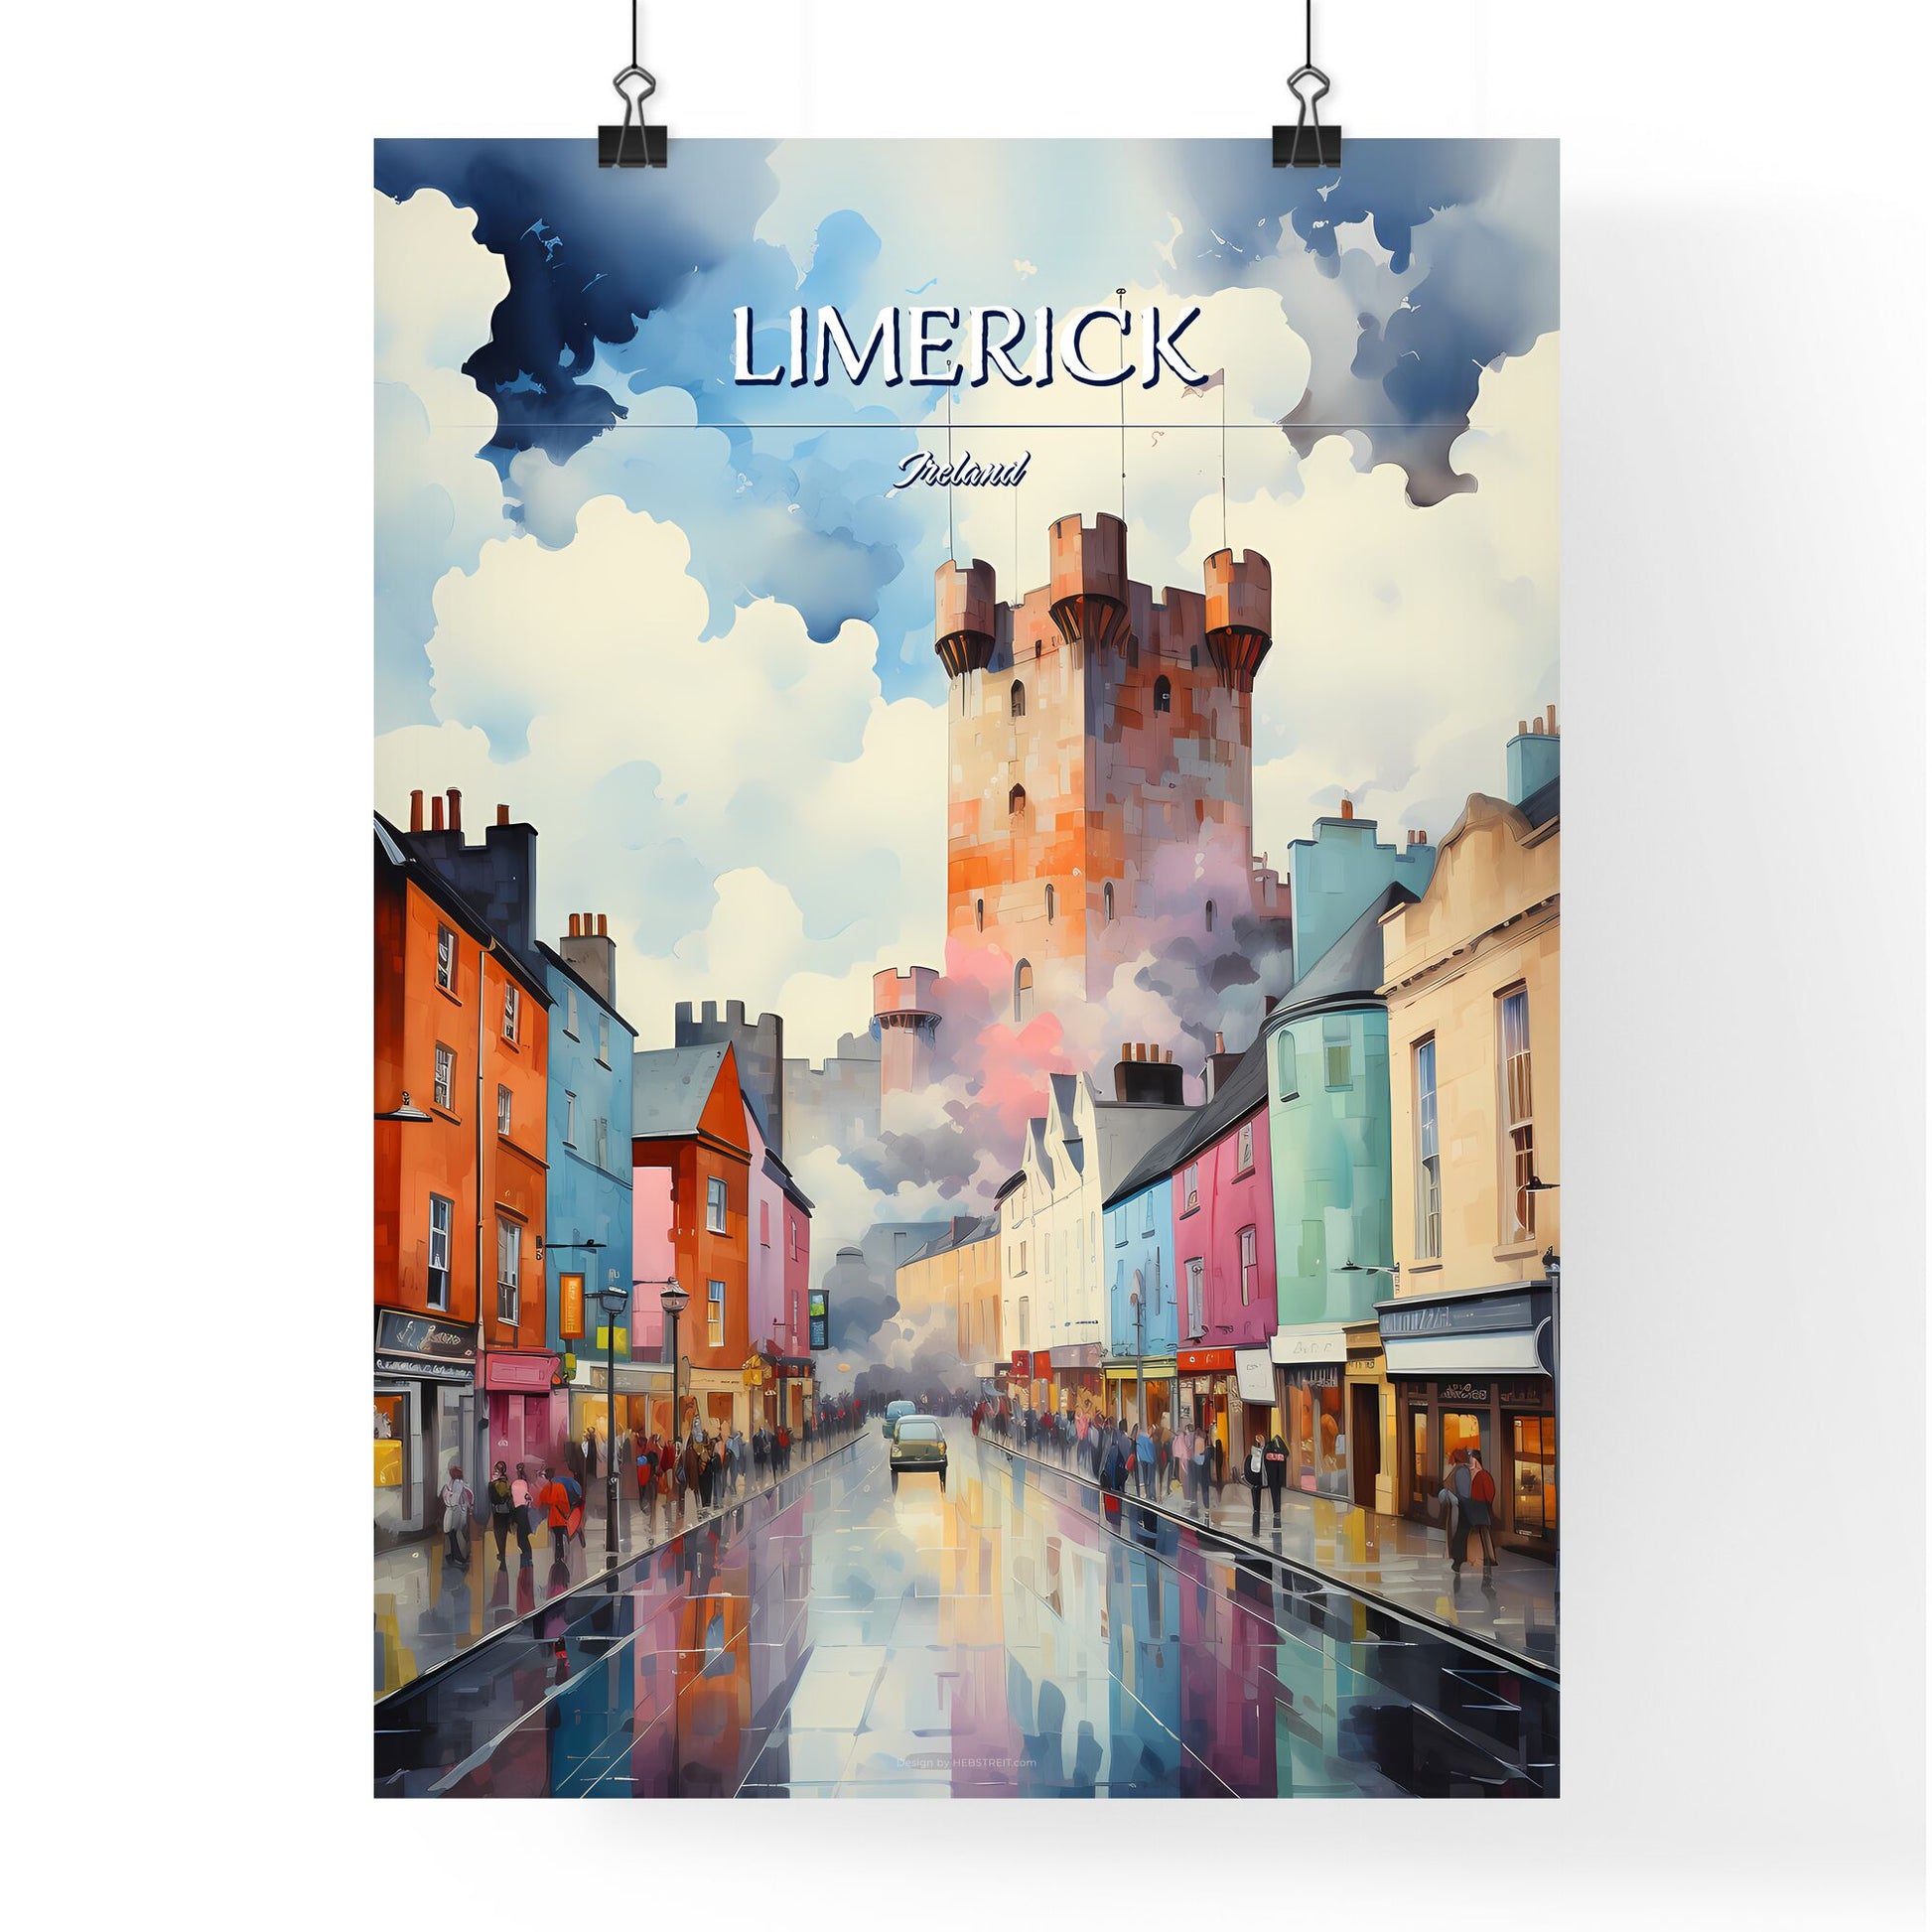 Limerick, Ireland - Art print of a street with buildings and a castle in the background Default Title